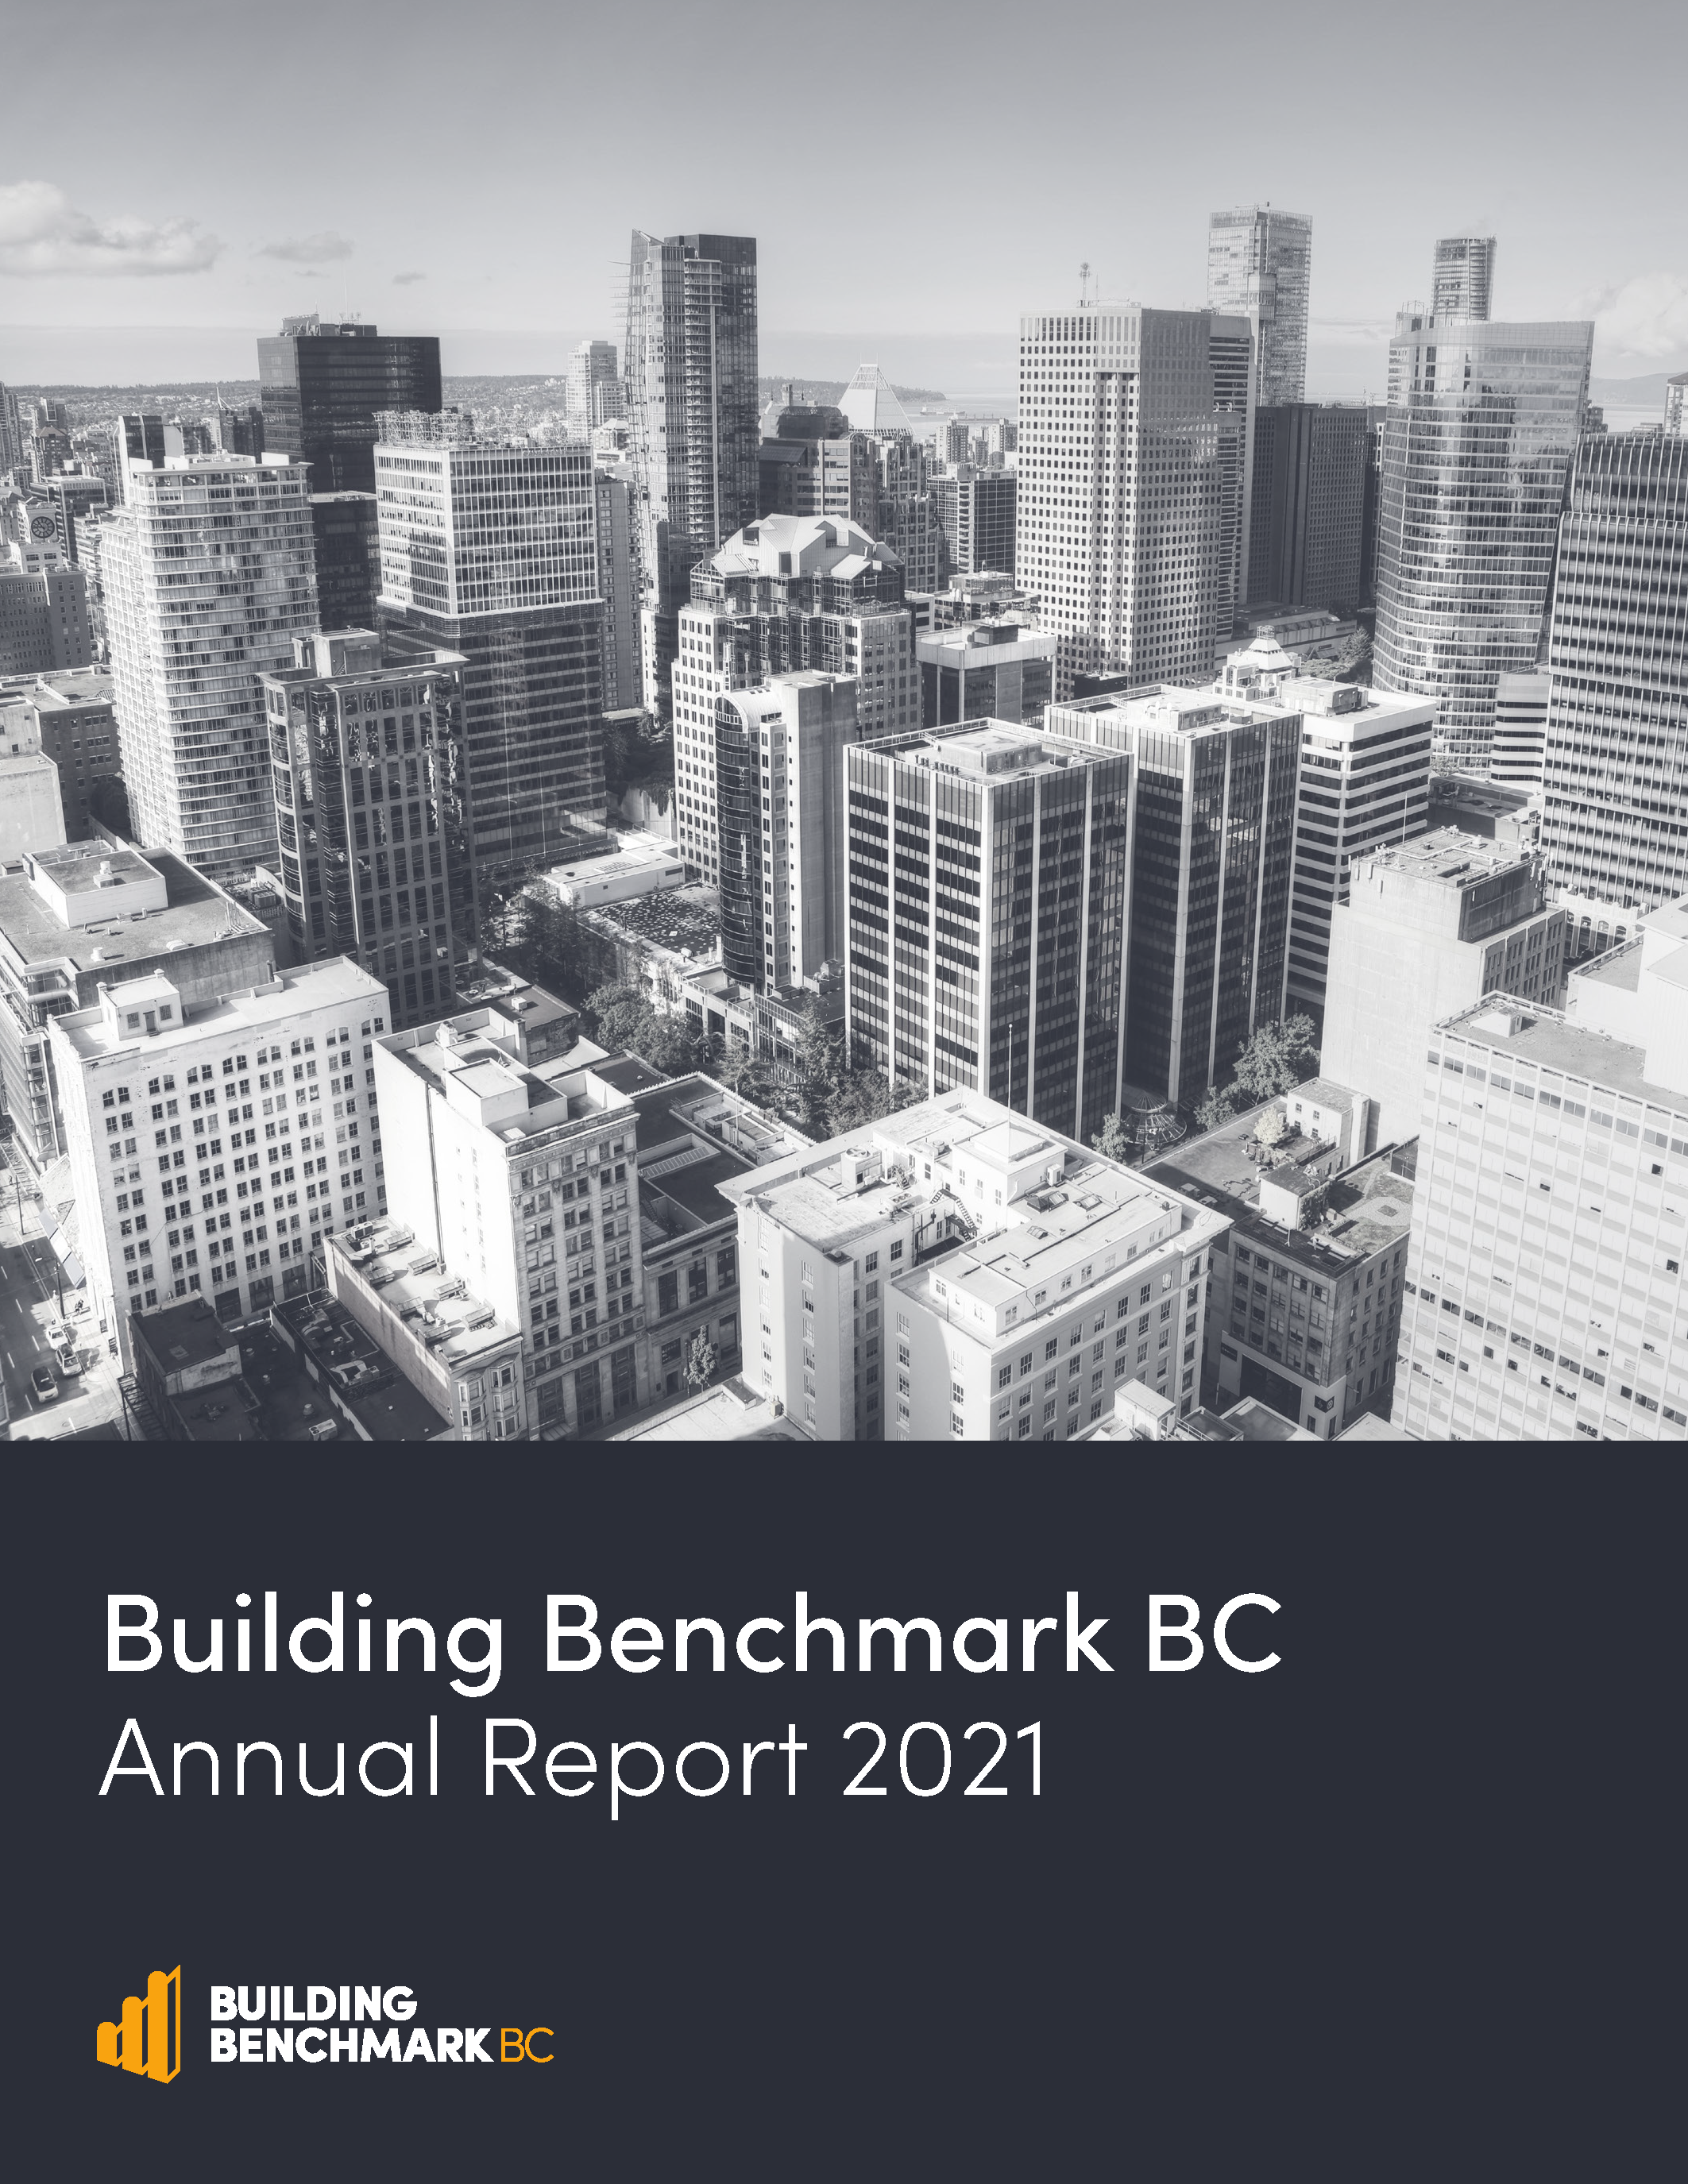 Building Benchmark BC Annual Report